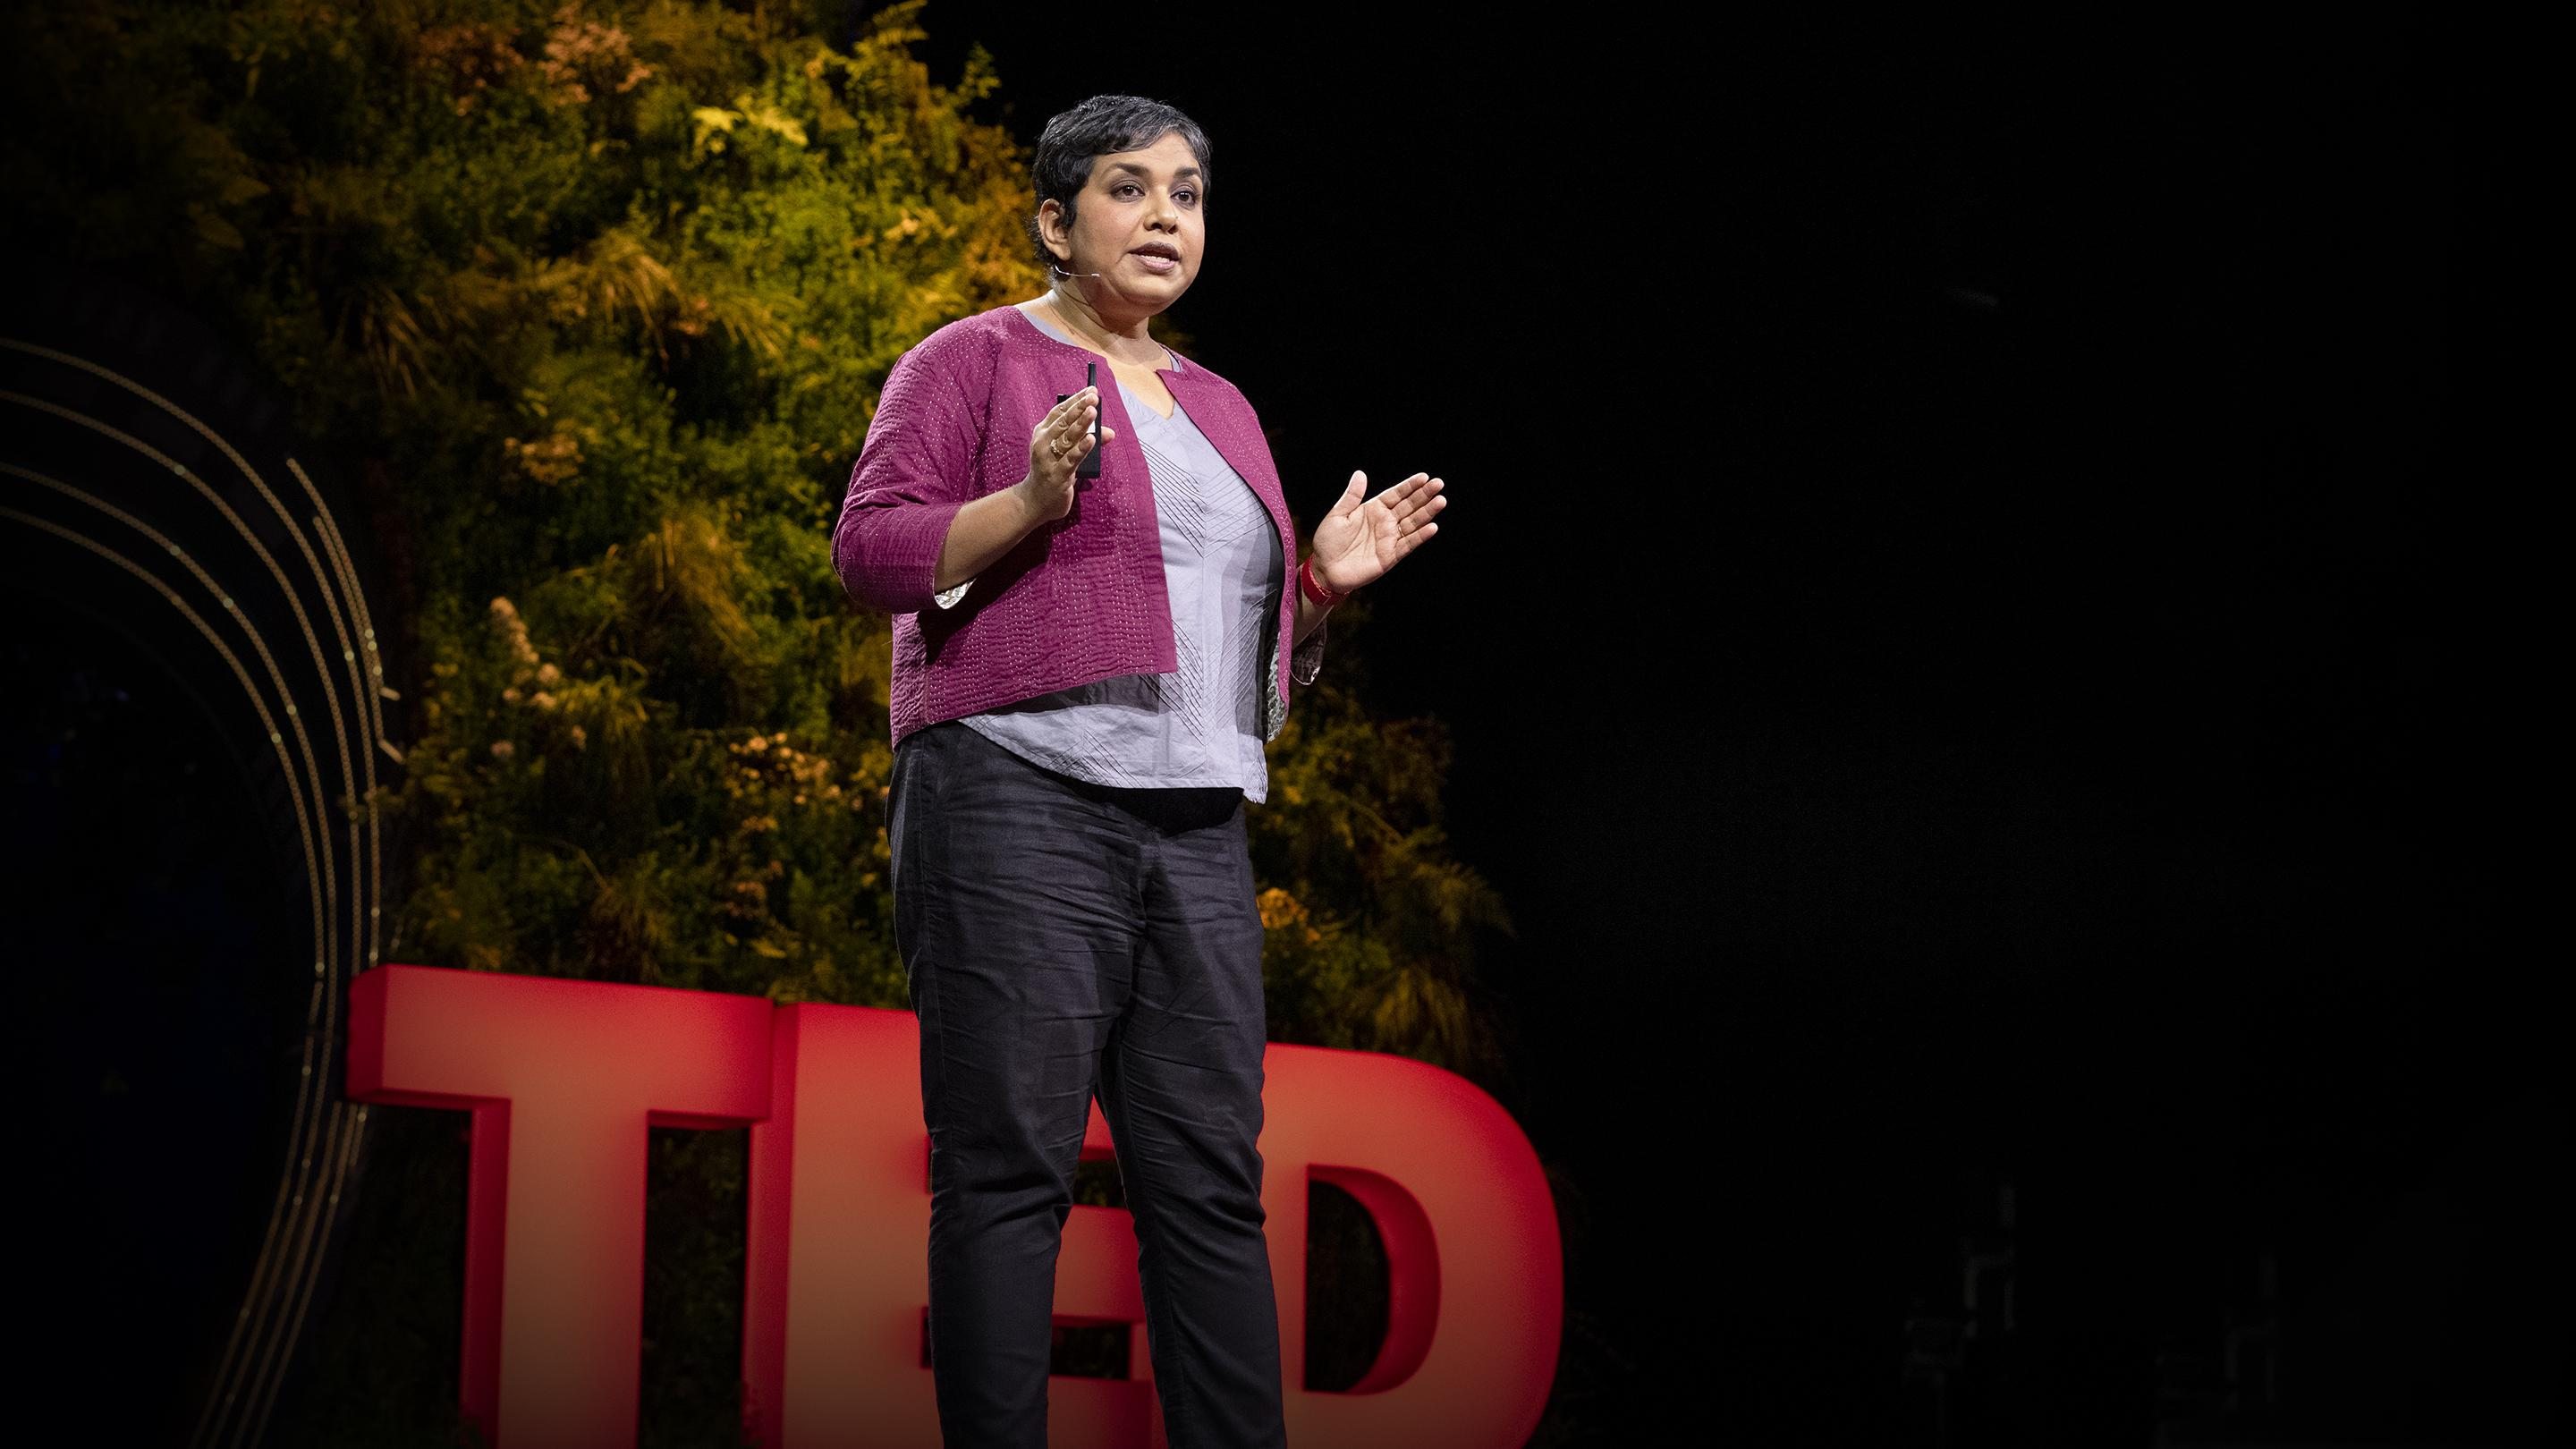 An idea from TED by Shweta Narayan entitled Ancient wisdom for healing the planet